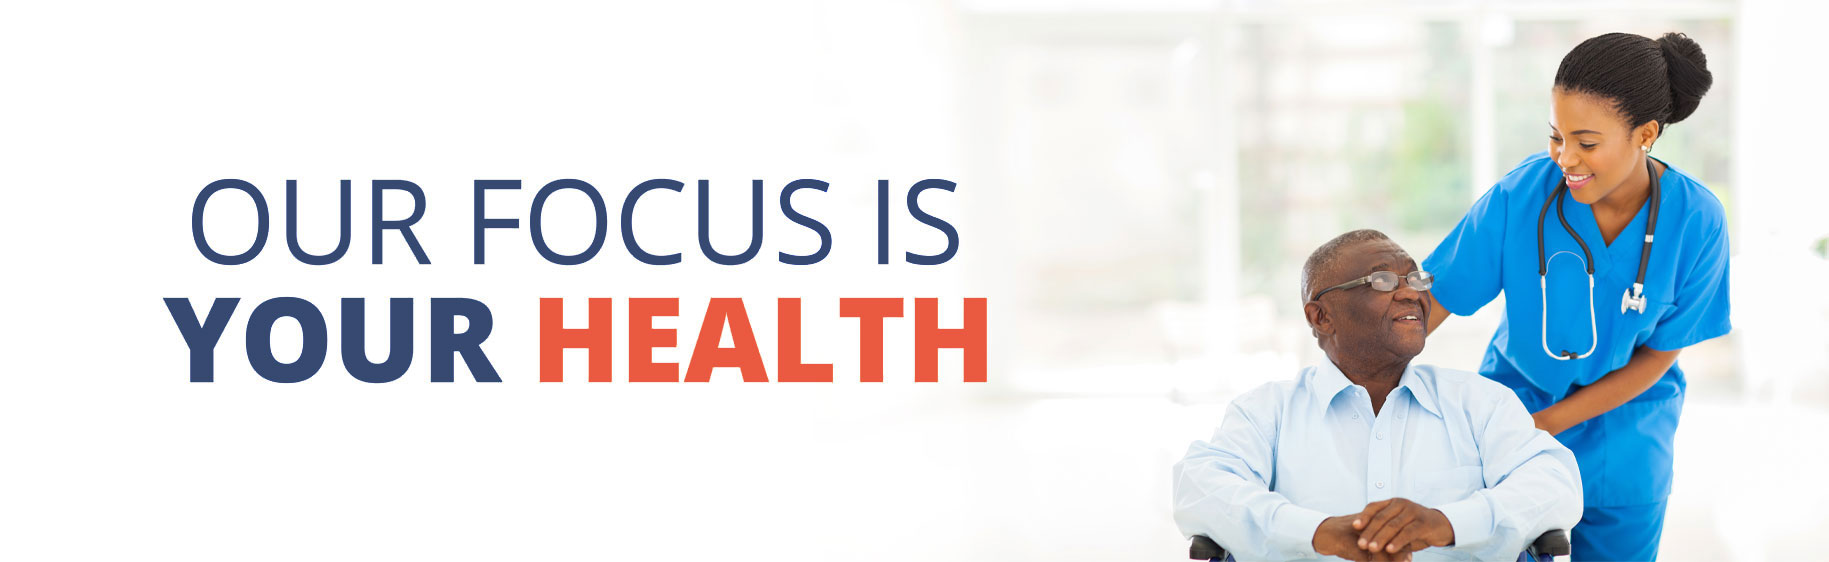 Our Focus is Your Health